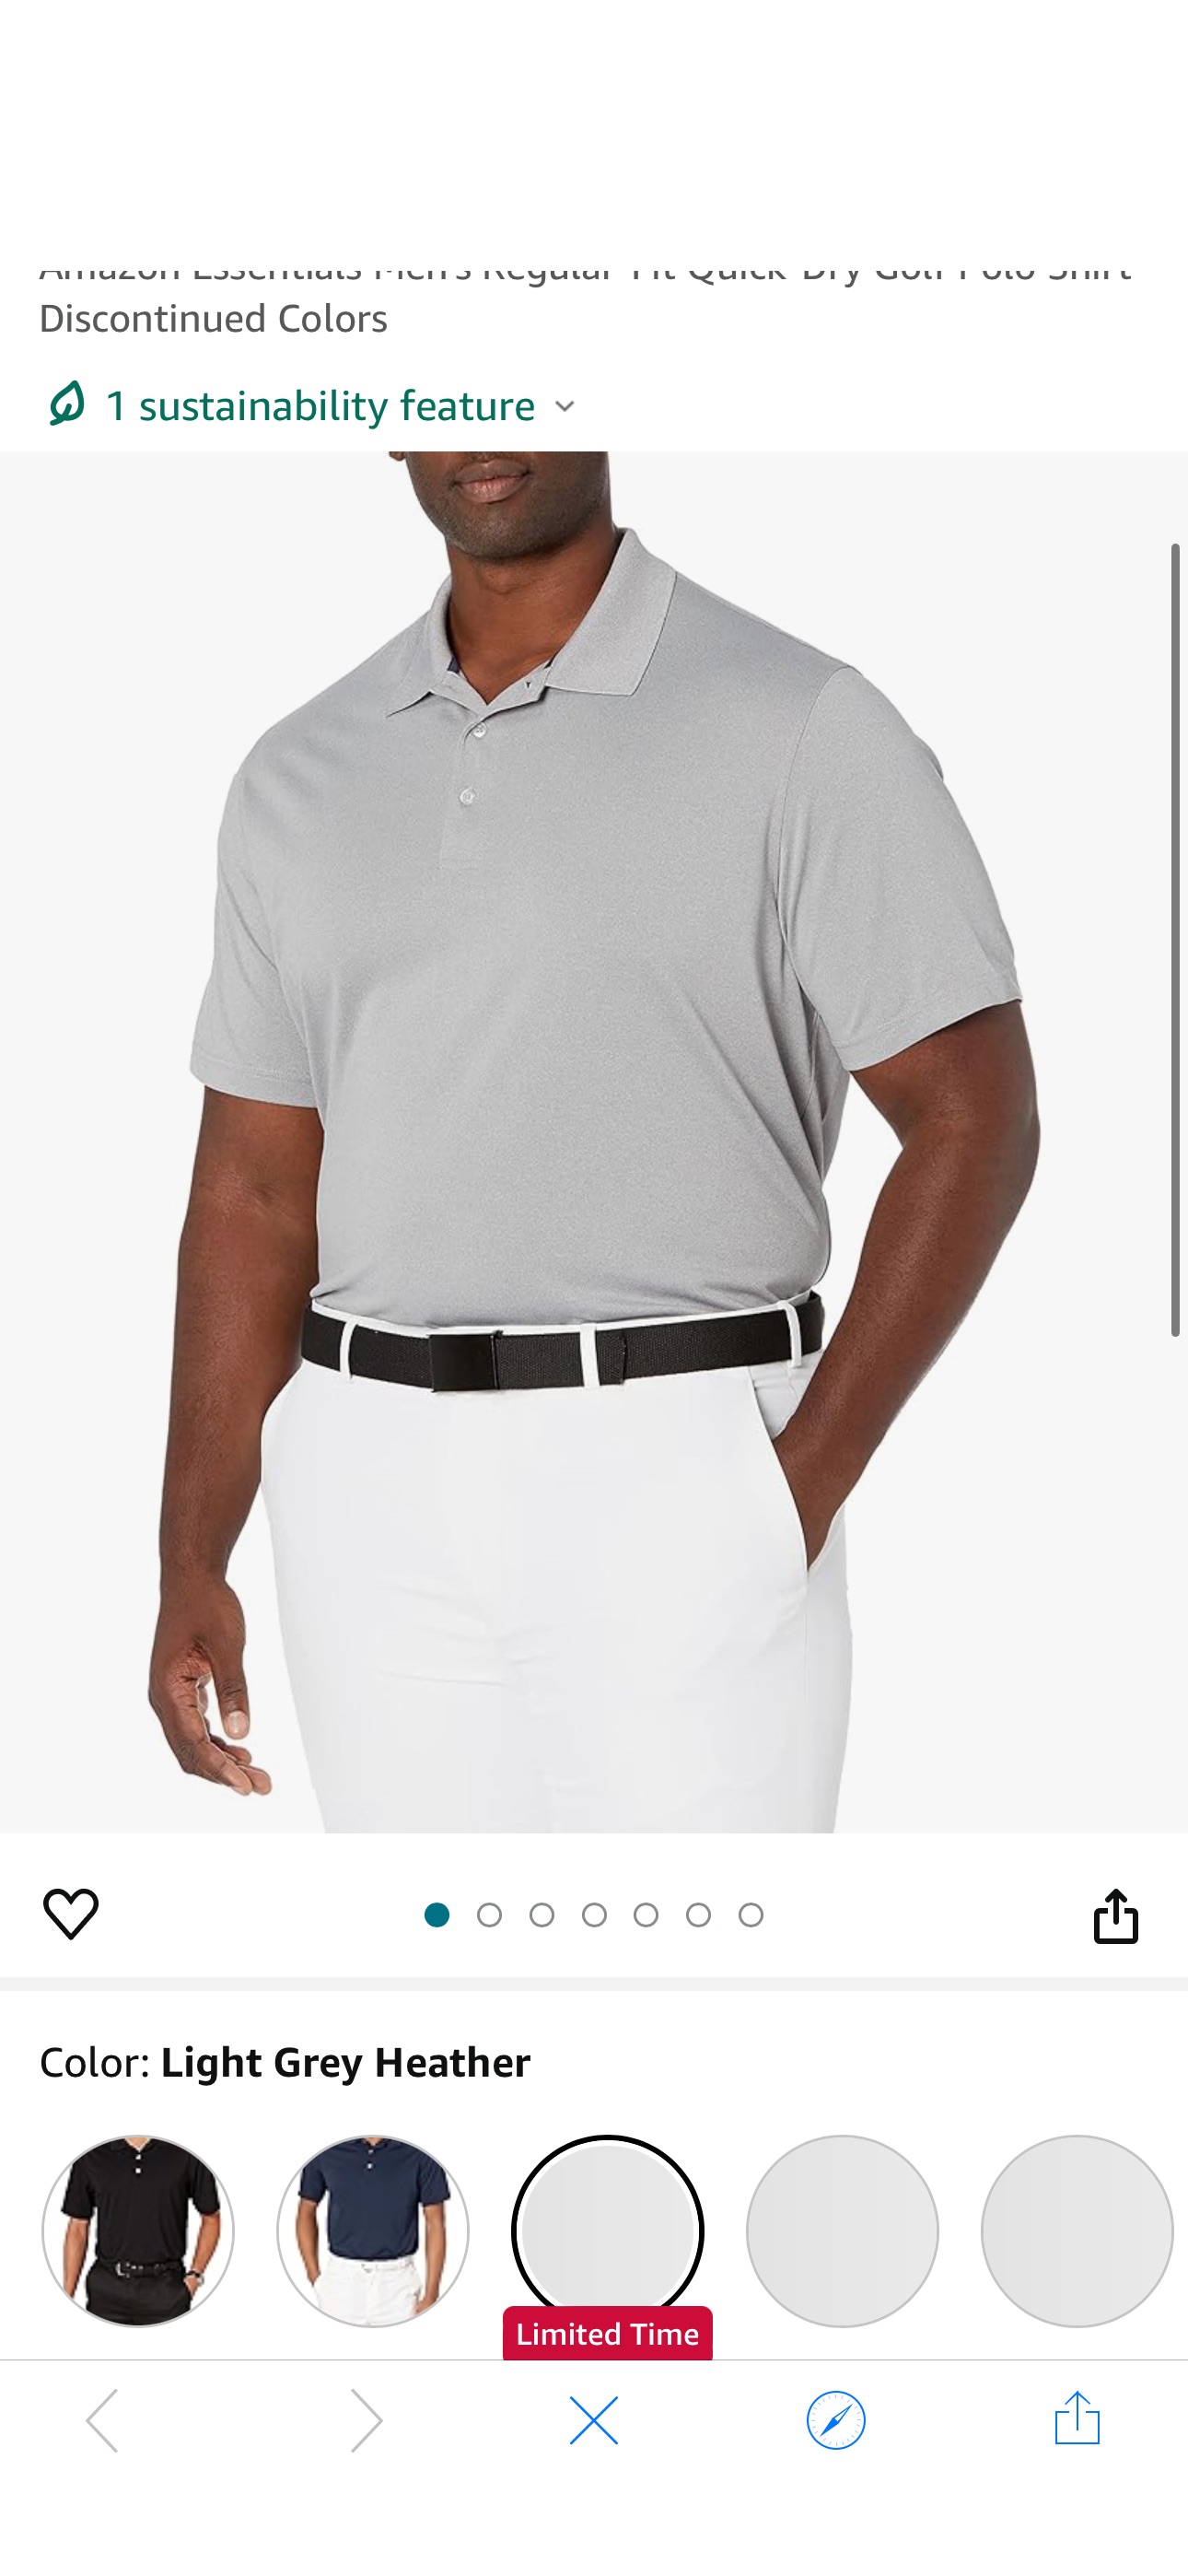 Amazon.com: Amazon Essentials Men's Regular-Fit Quick-Dry Golf Polo Shirt-Discontinued Colors, Light Grey Heather, XX-Large Big Tall : Clothing, Shoes & Jewelry